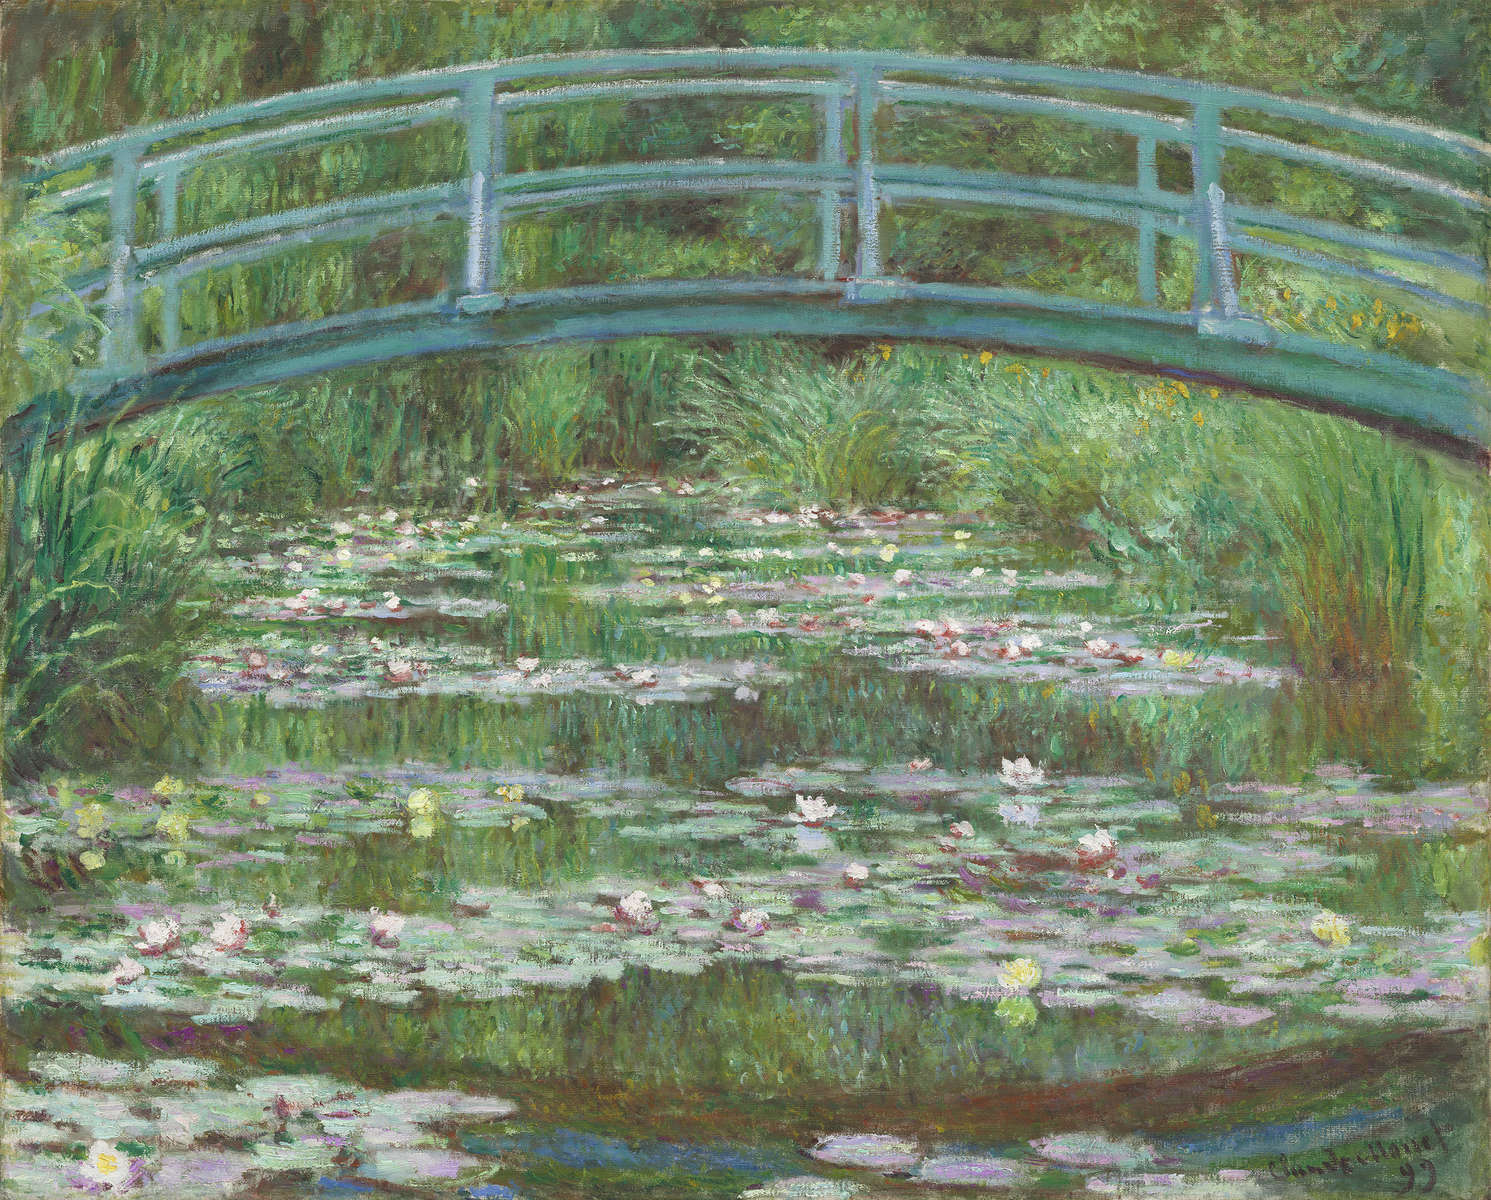 Claude Monet (French, 1840 - 1926 ), The Japanese Footbridge, 1899, oil on canvas, Gift of Victoria Nebeker Coberly, in memory of her son John W. Mudd, and Walter H. and Leonore Annenberg